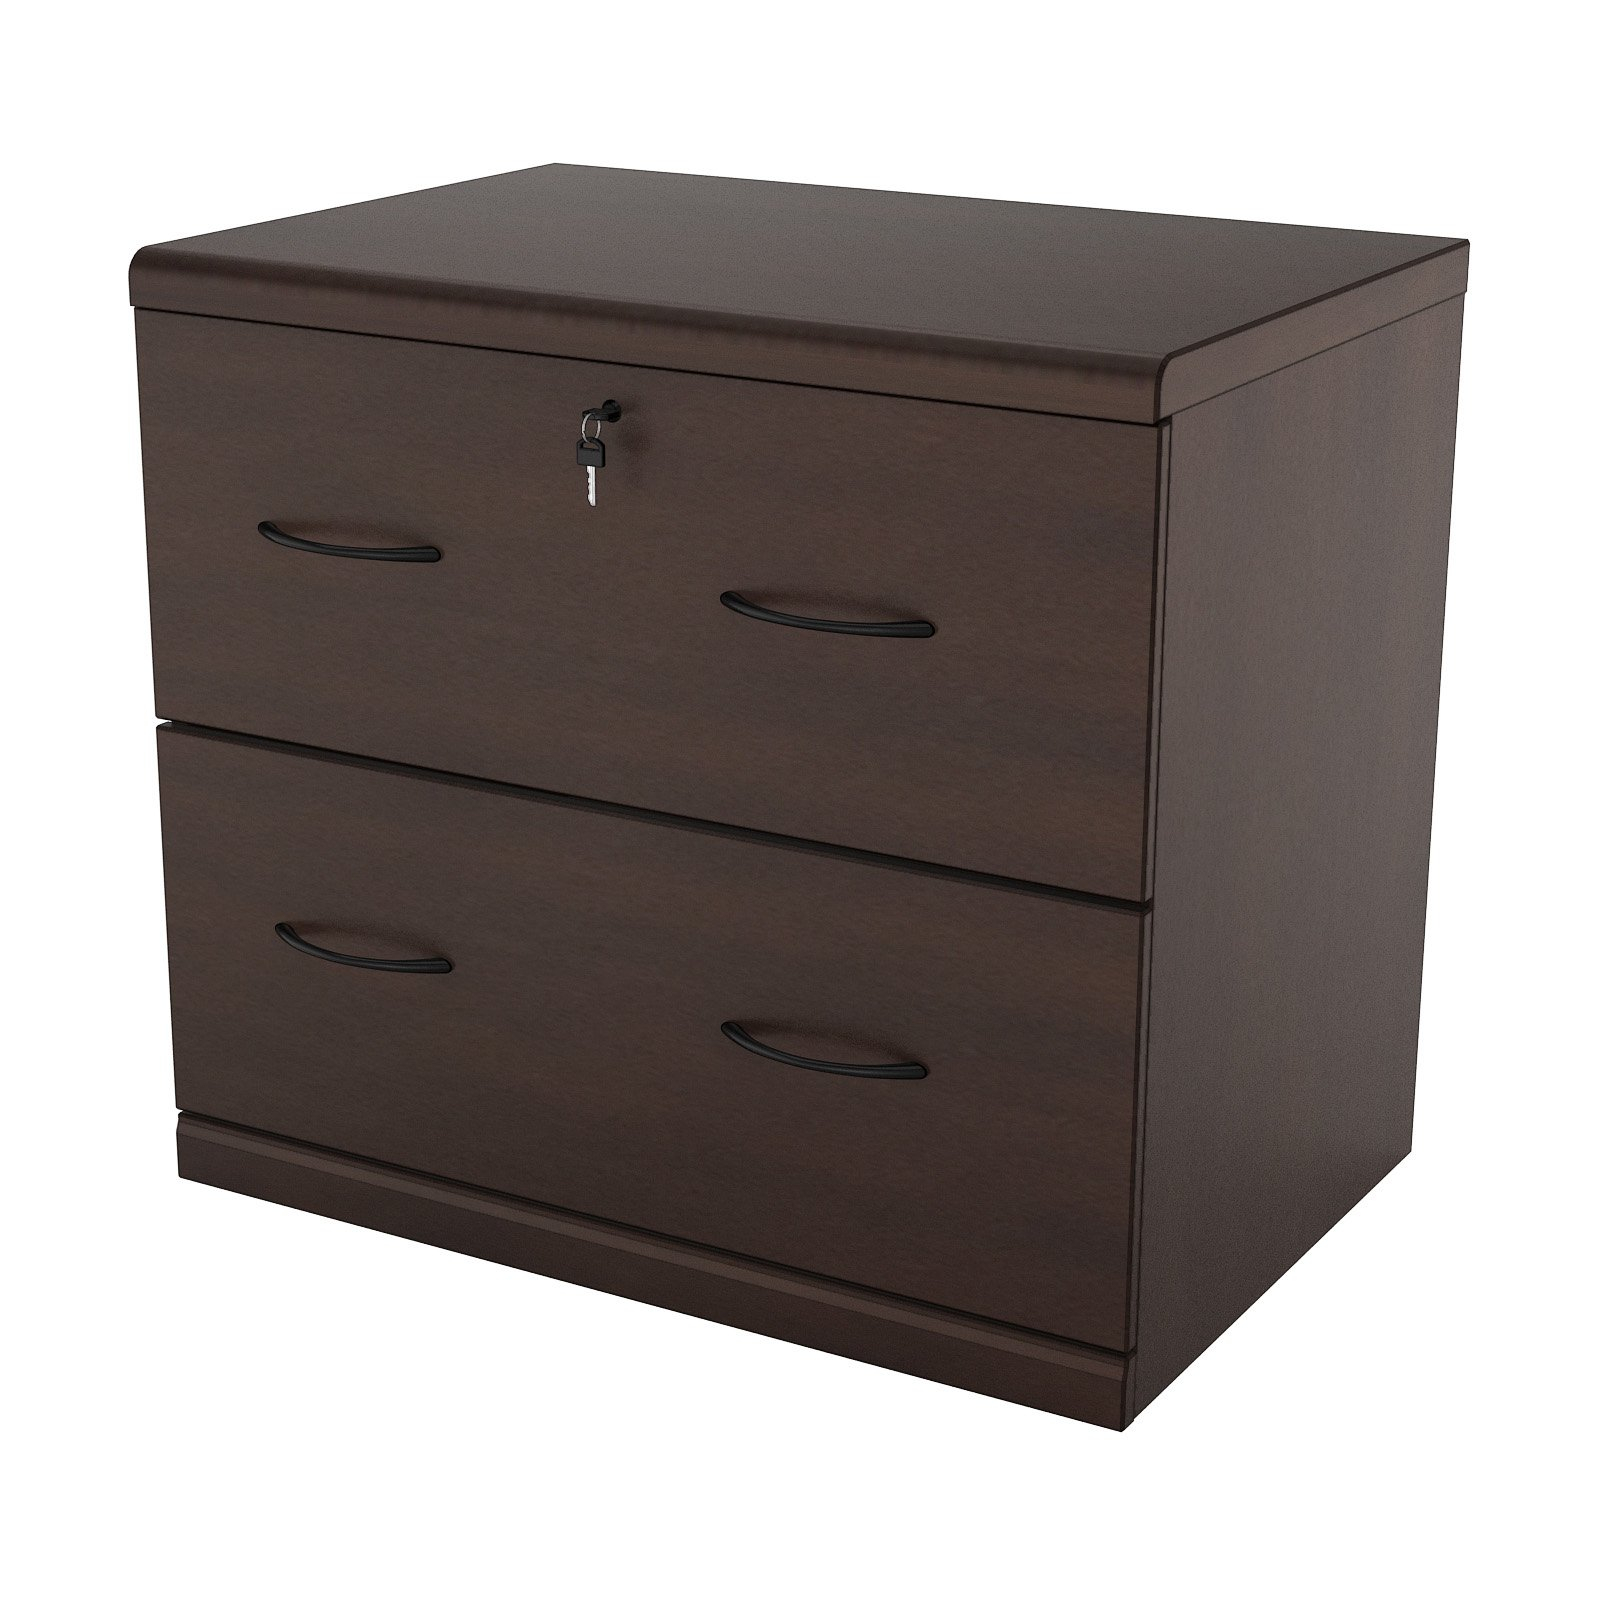 2 Drawer Lateral Wood Lockable Filing Cabinet Espresso Walmart in dimensions 1600 X 1600